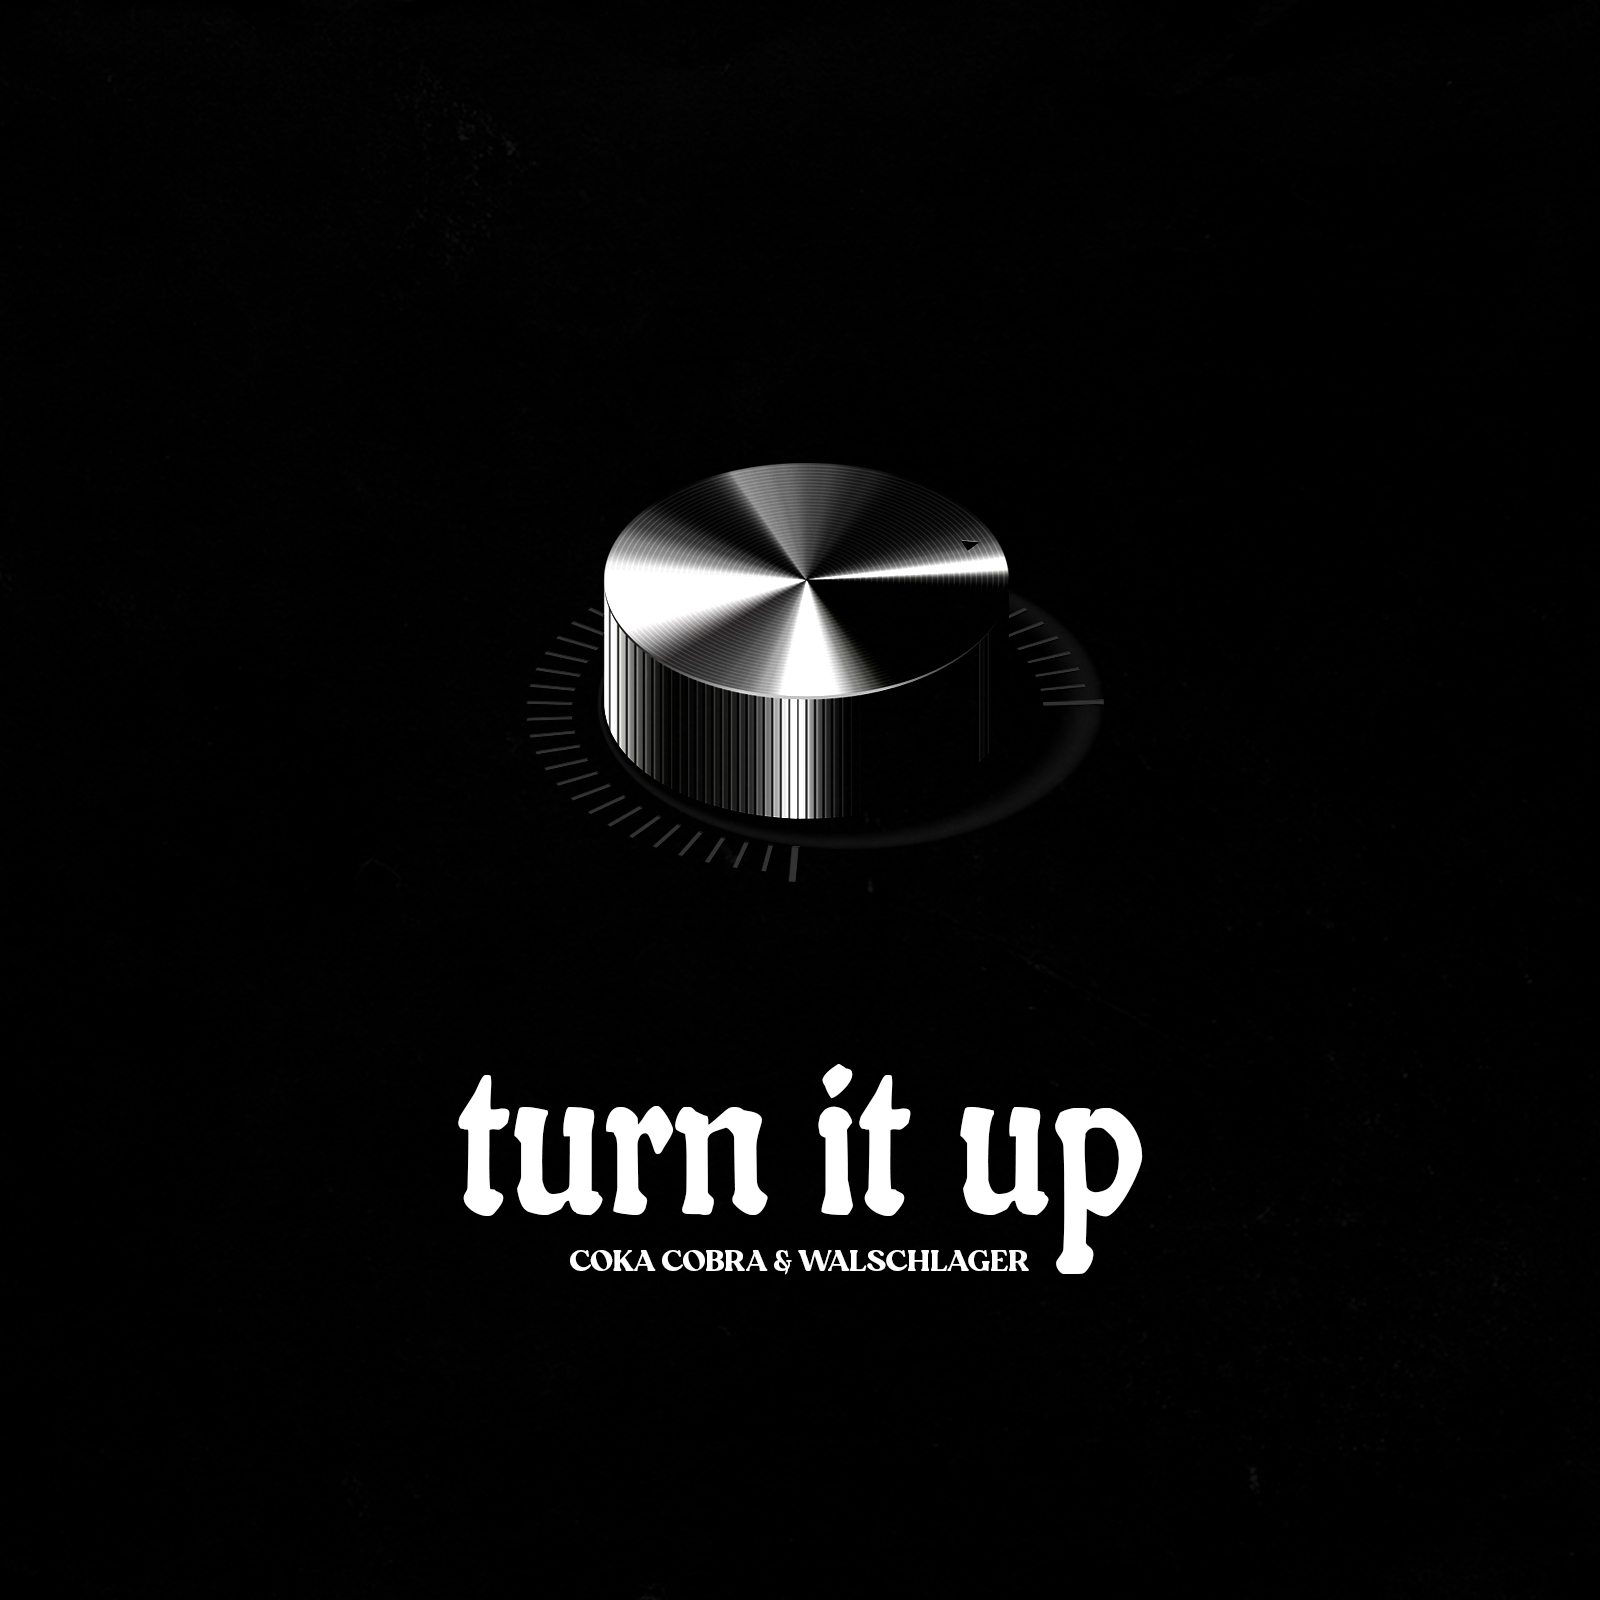 Coka Cobra & Walschlager Follow Up Their Collaboration ‘Drop This,’ With ‘Turn It Up’